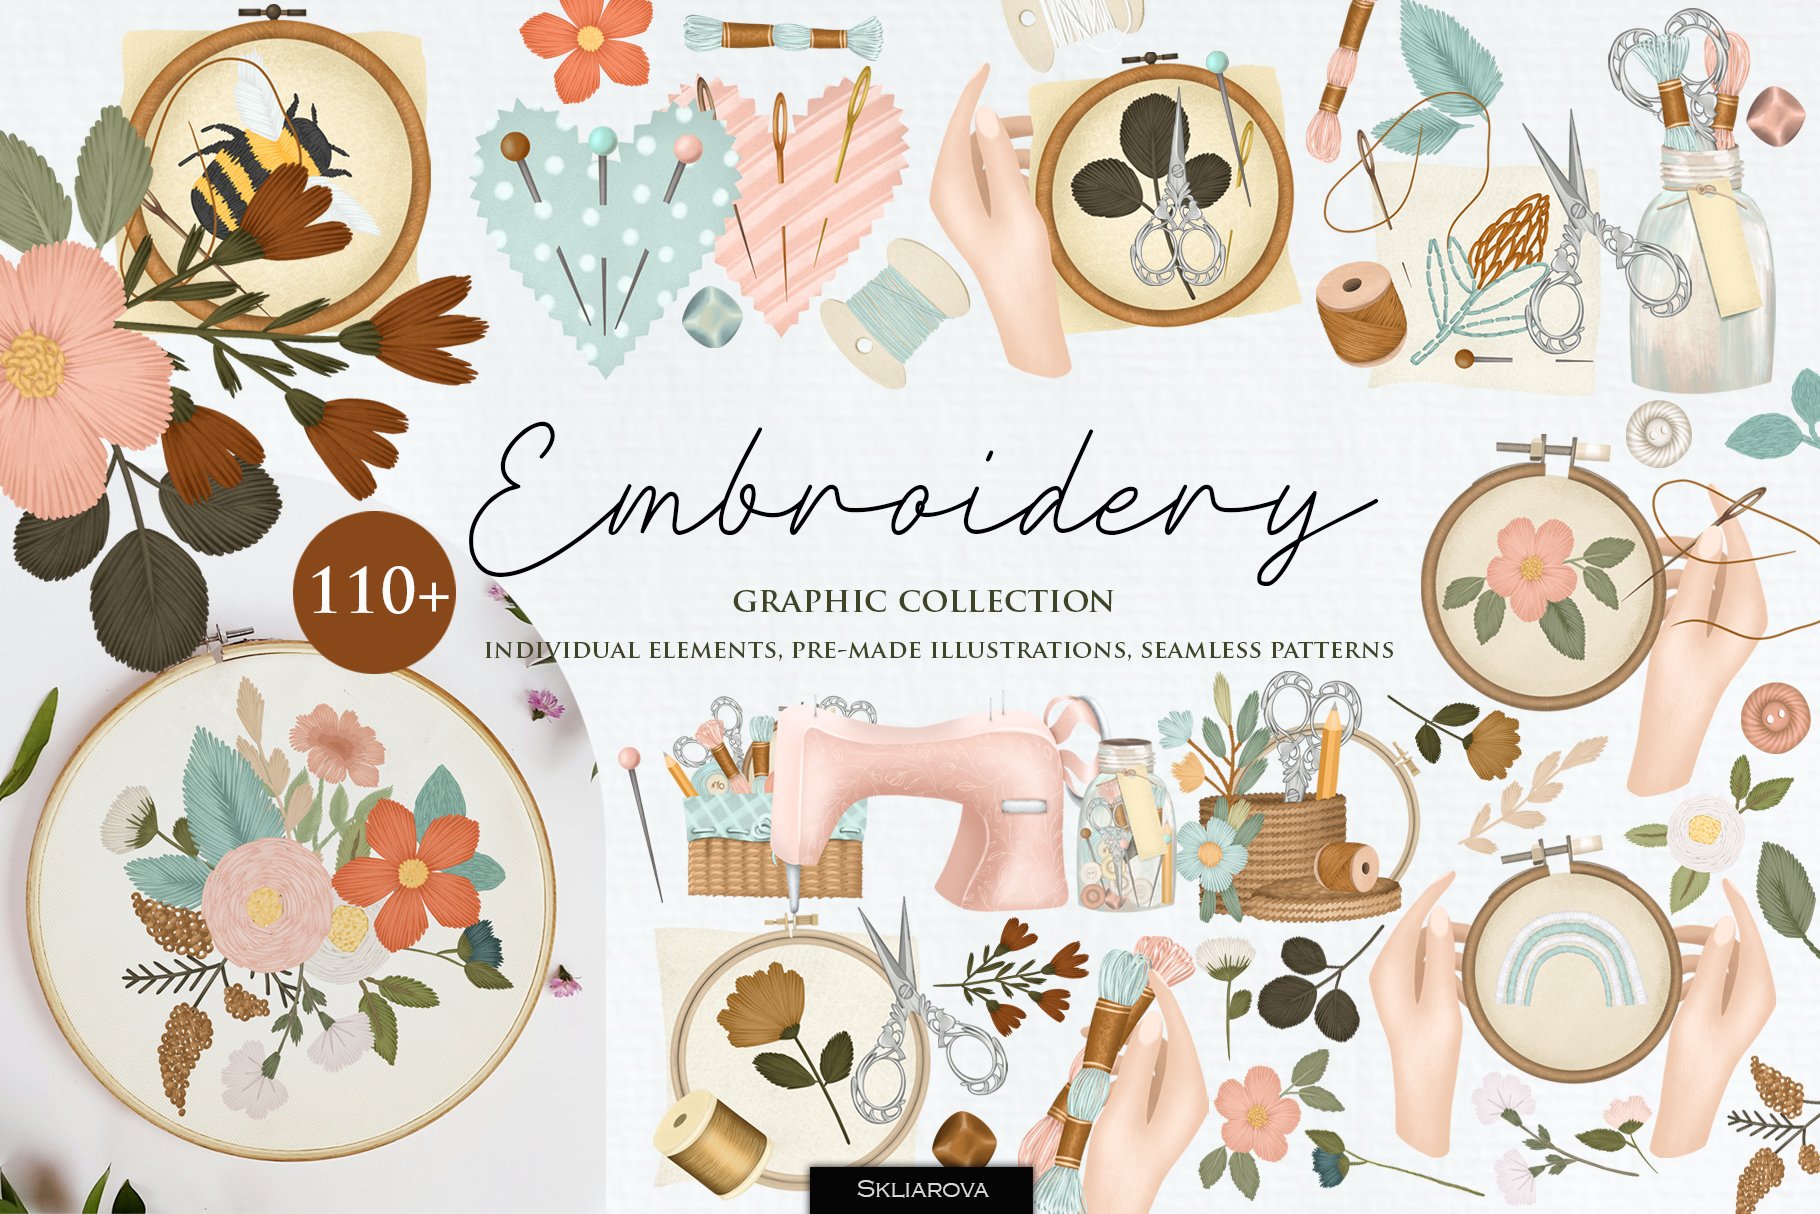 embroidery needlework collection